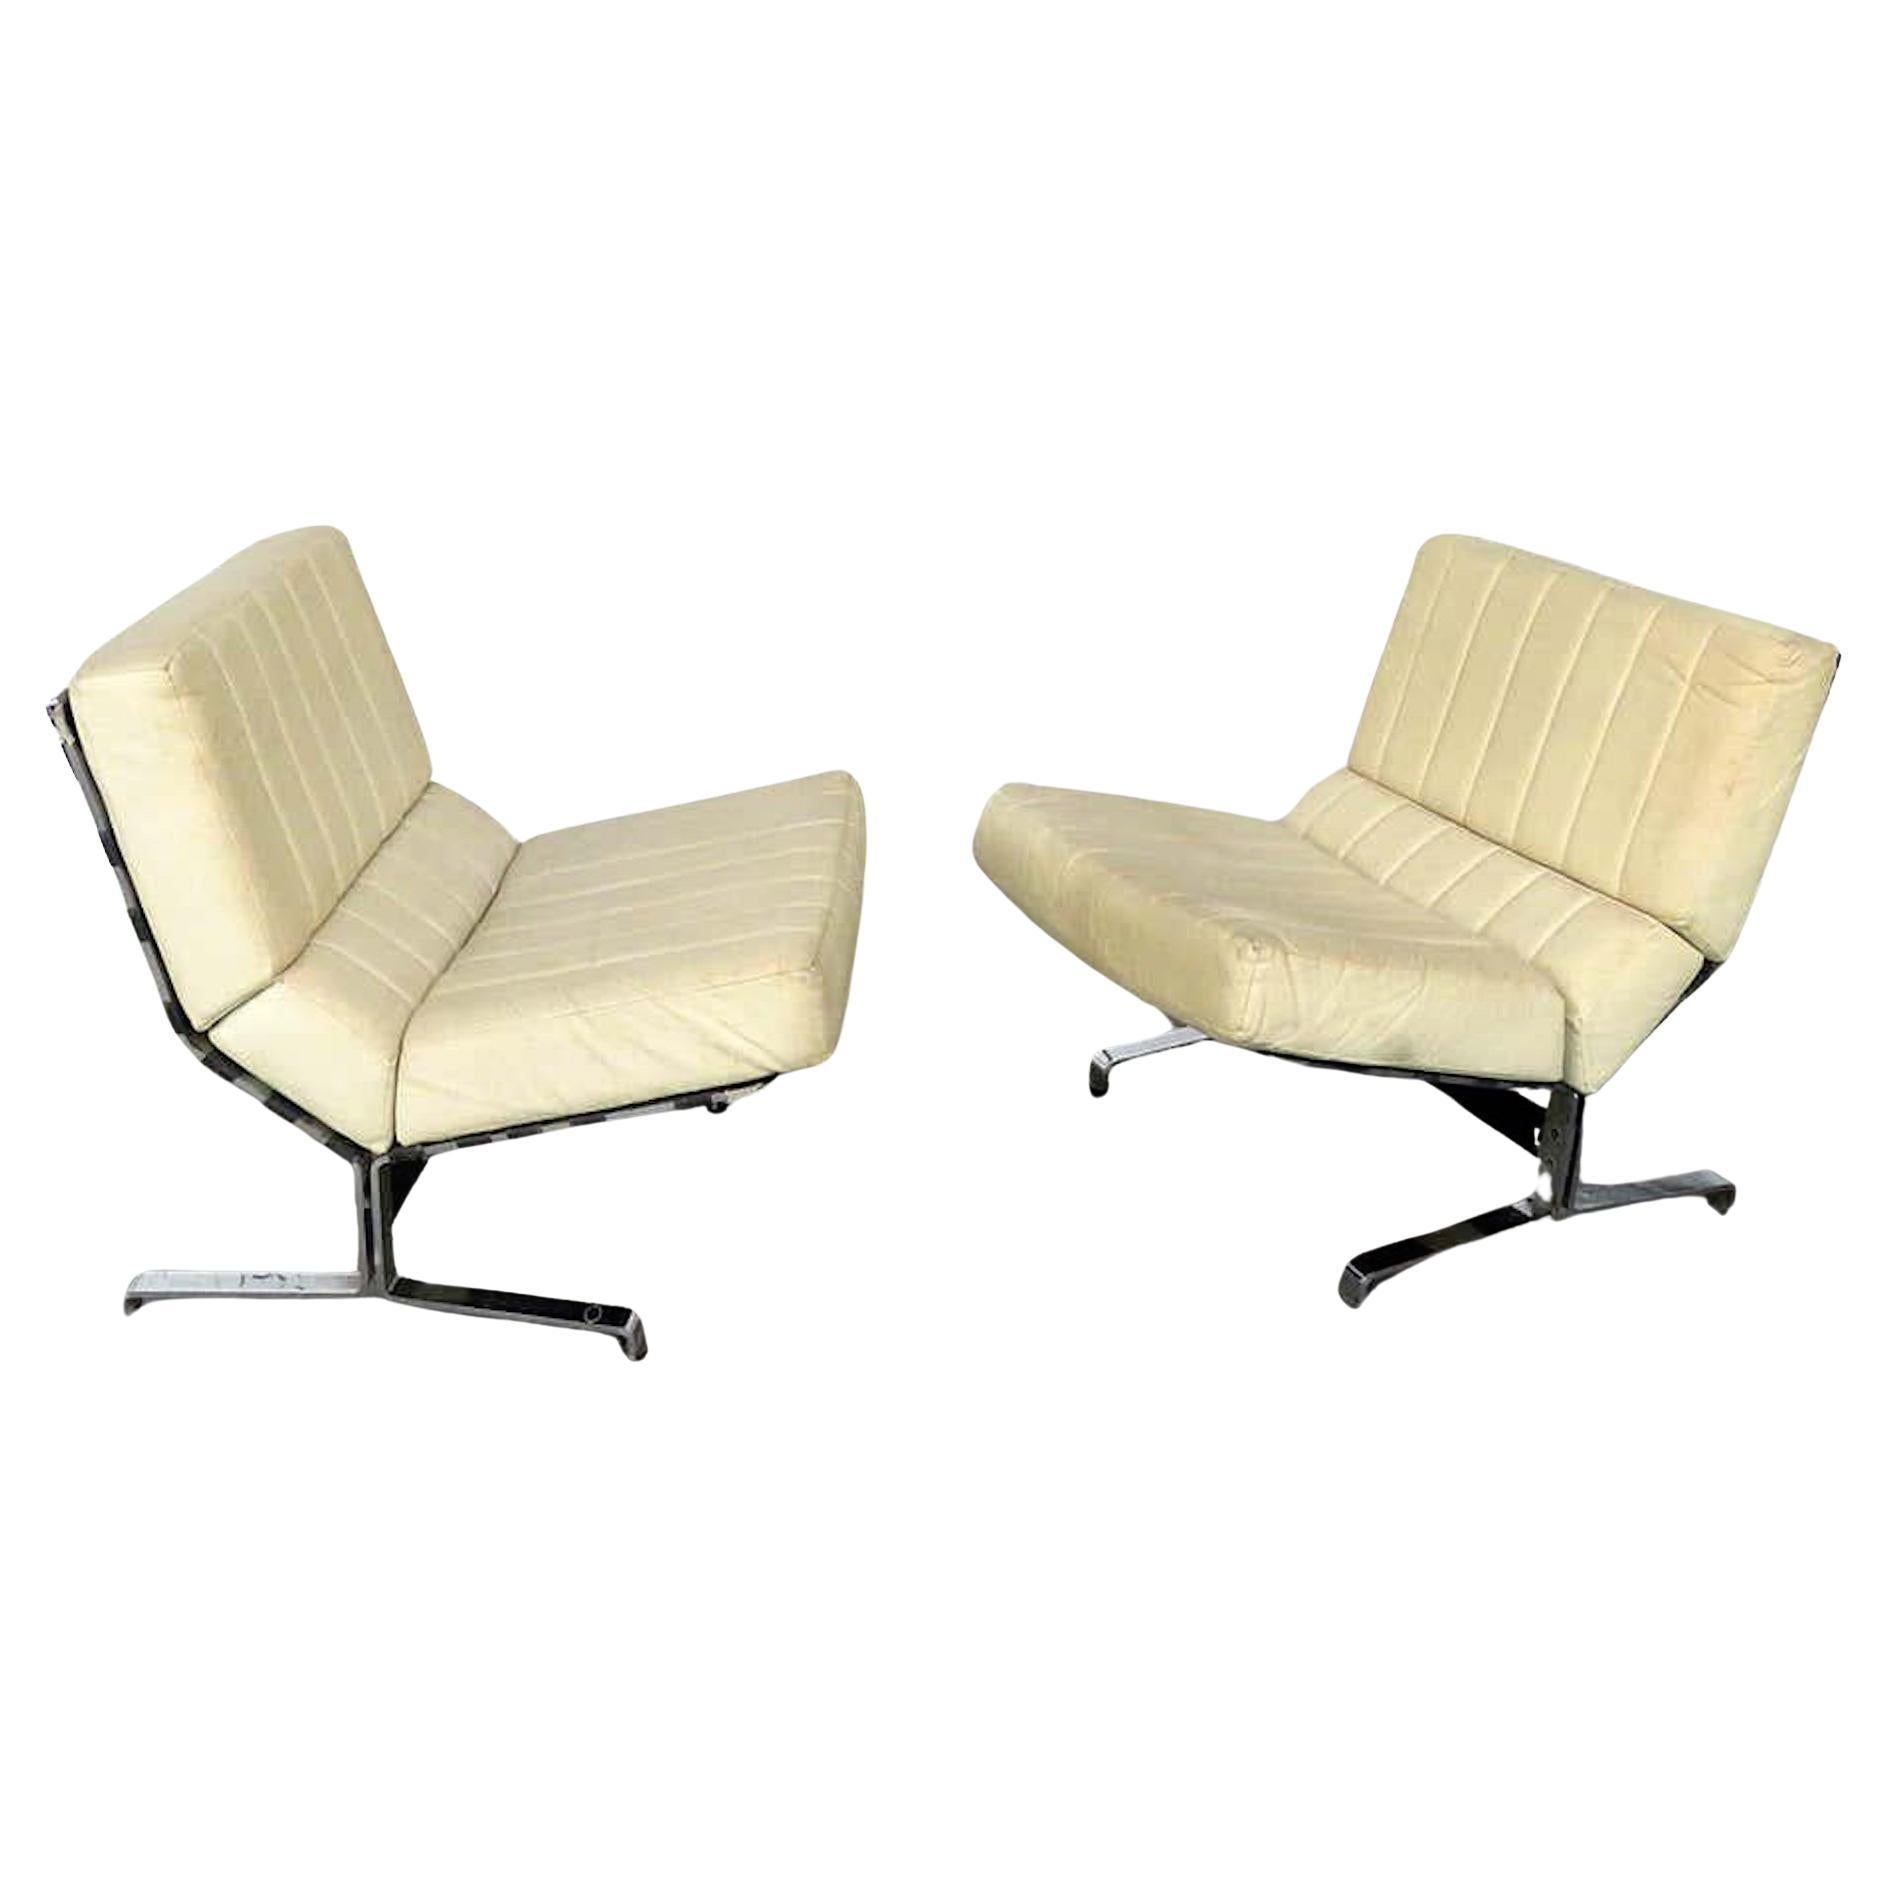 Italian Midcentury Lounge Chairs For Sale